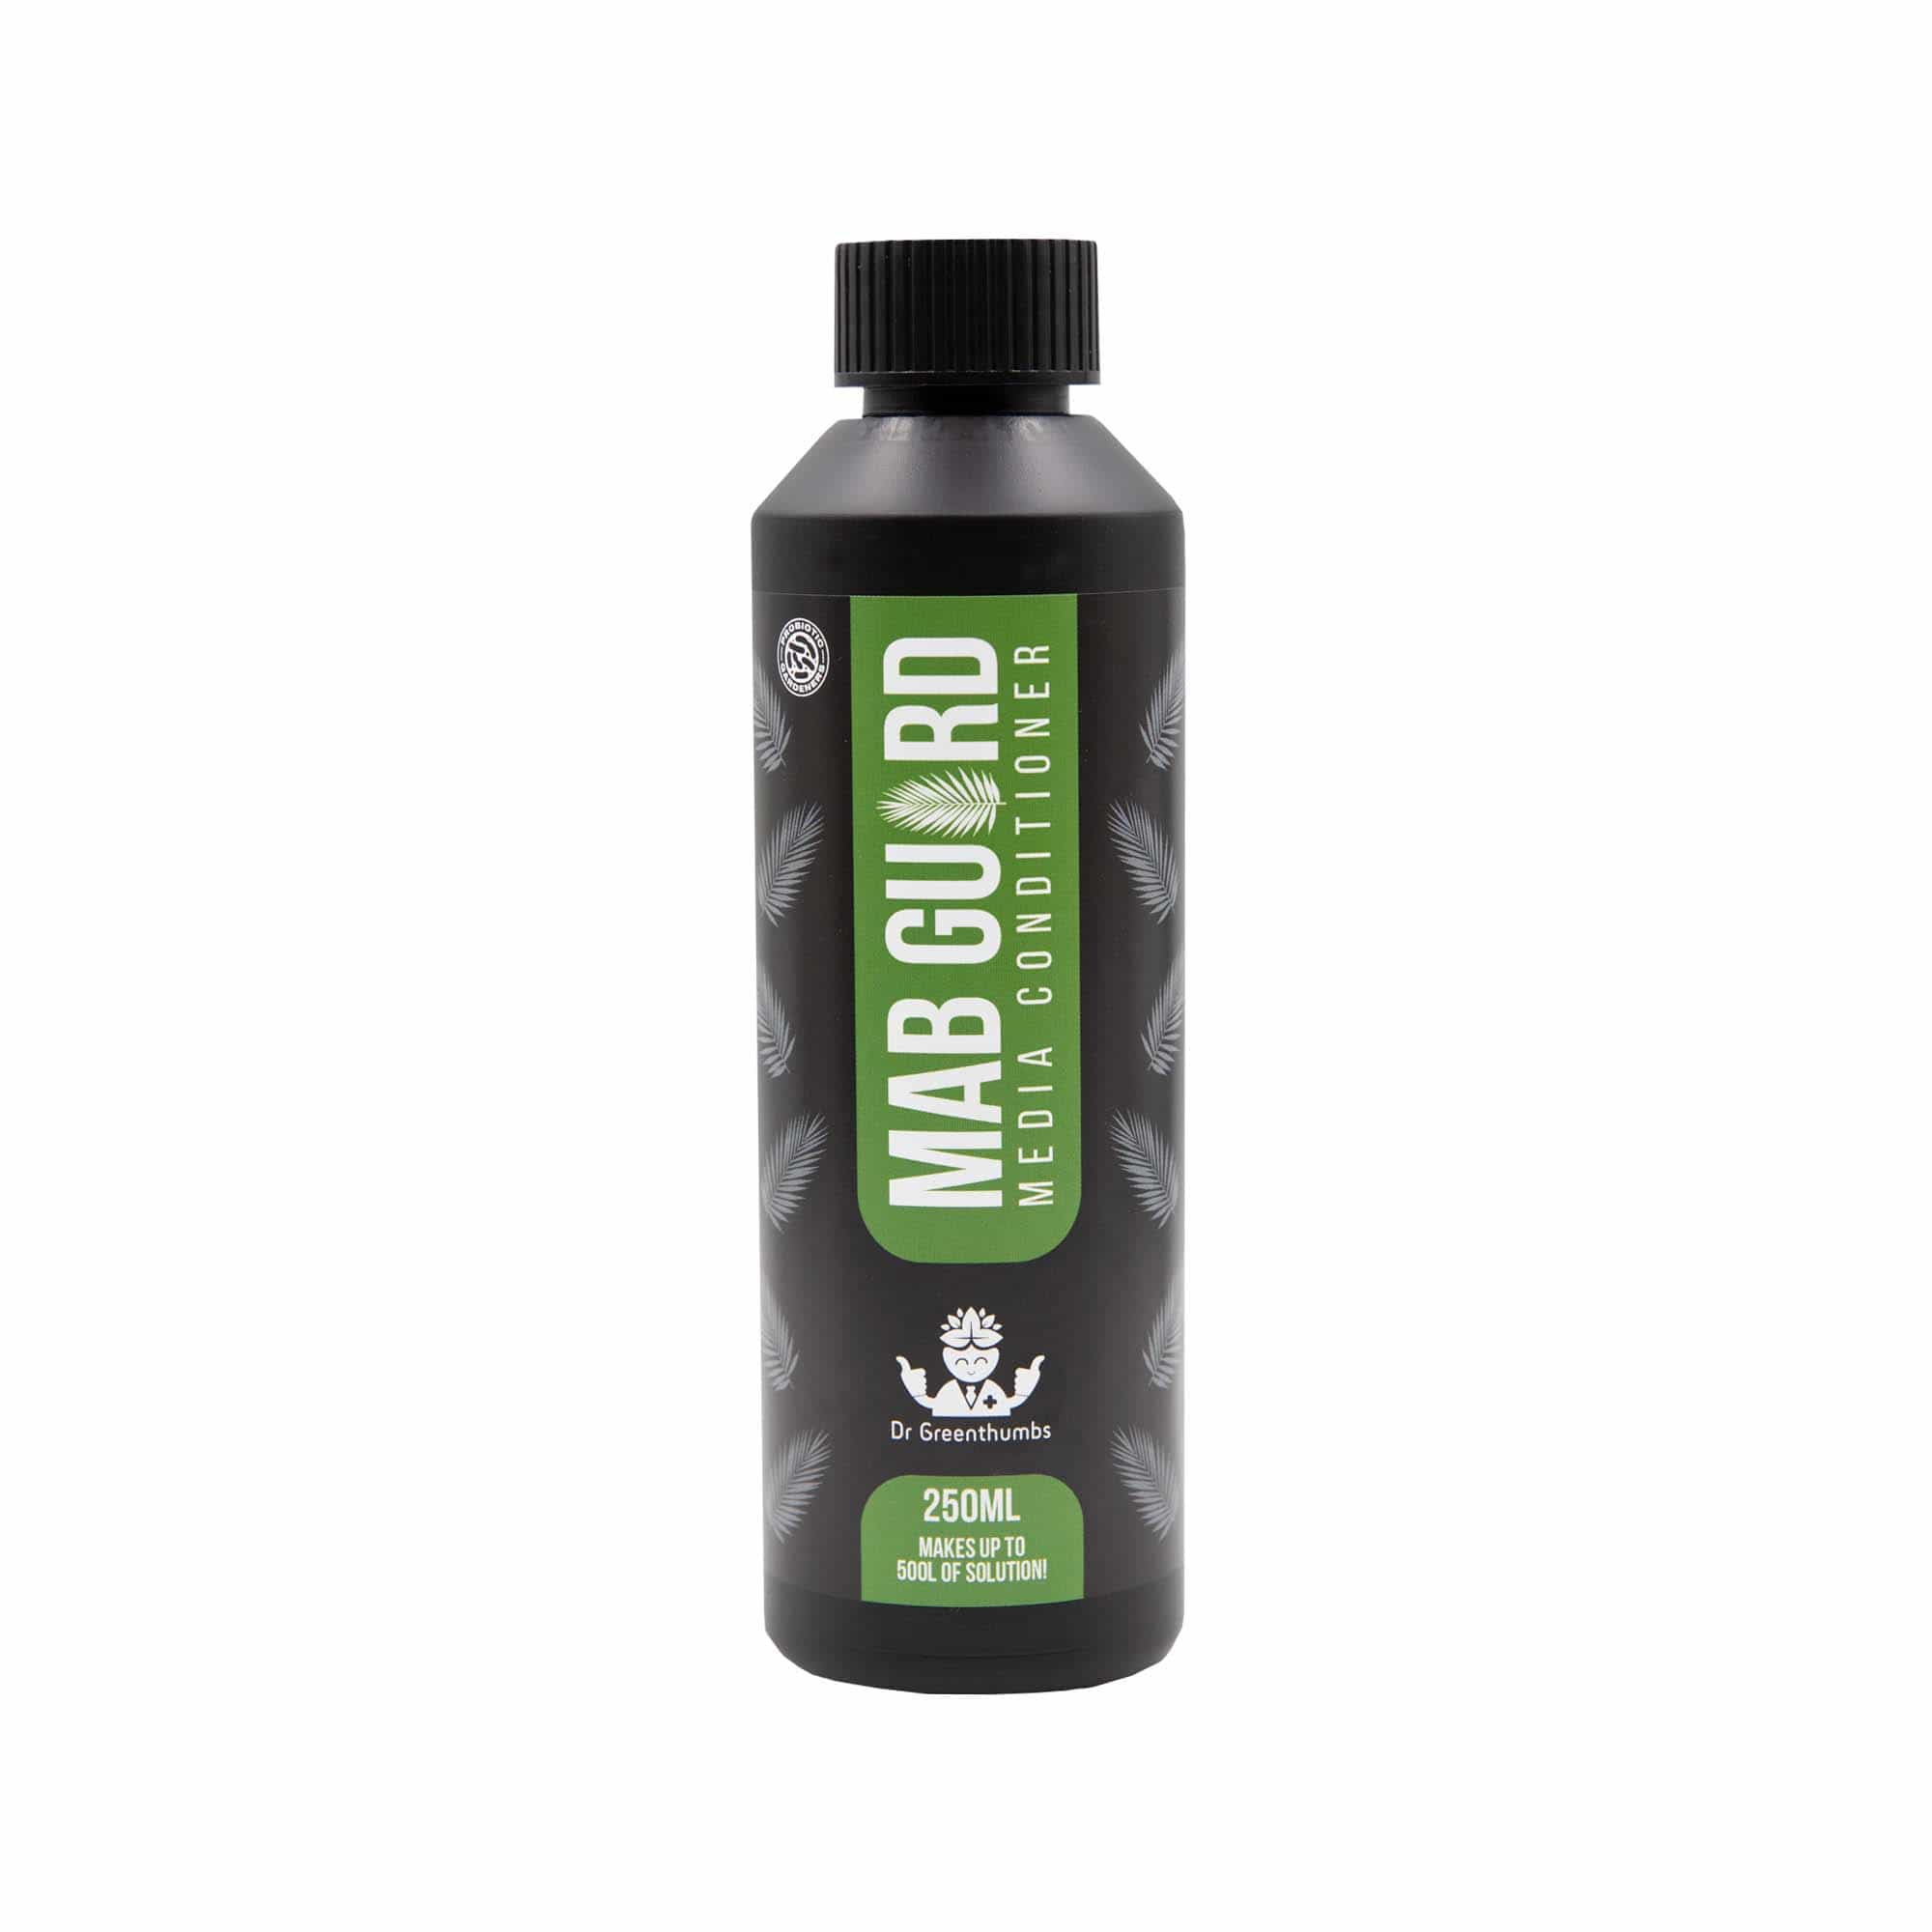 Dr Greenthumbs GreenSpace MAB Guard Root Protection